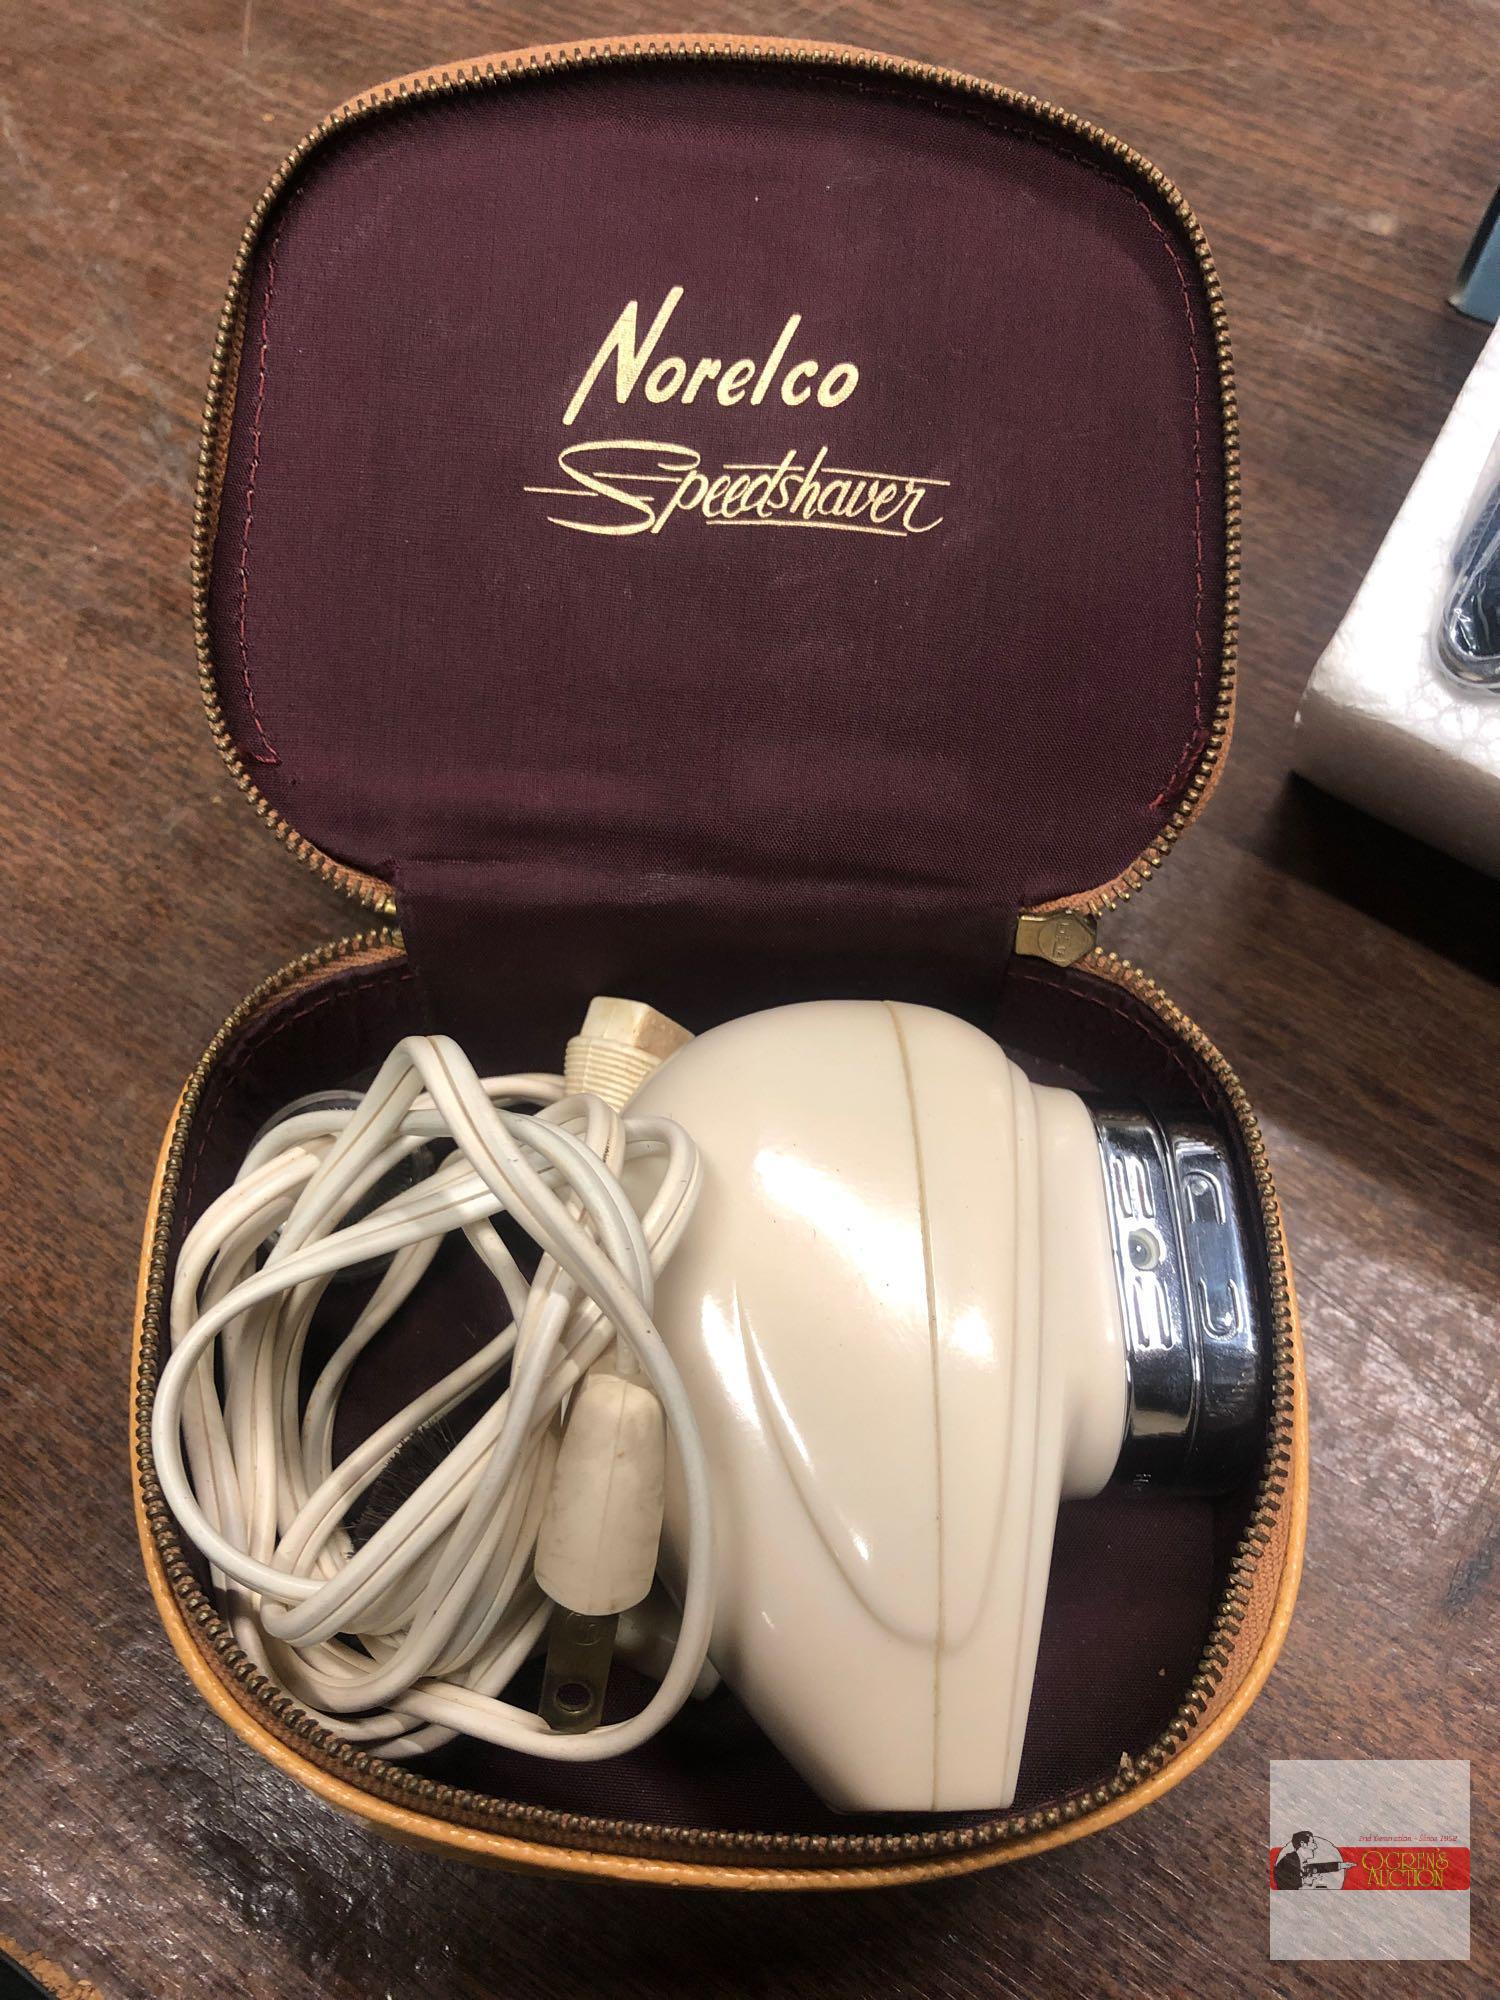 Vintage Norelco Electric Speedshaver in case & Health Team electronic Self taking Blood Pressure Kit